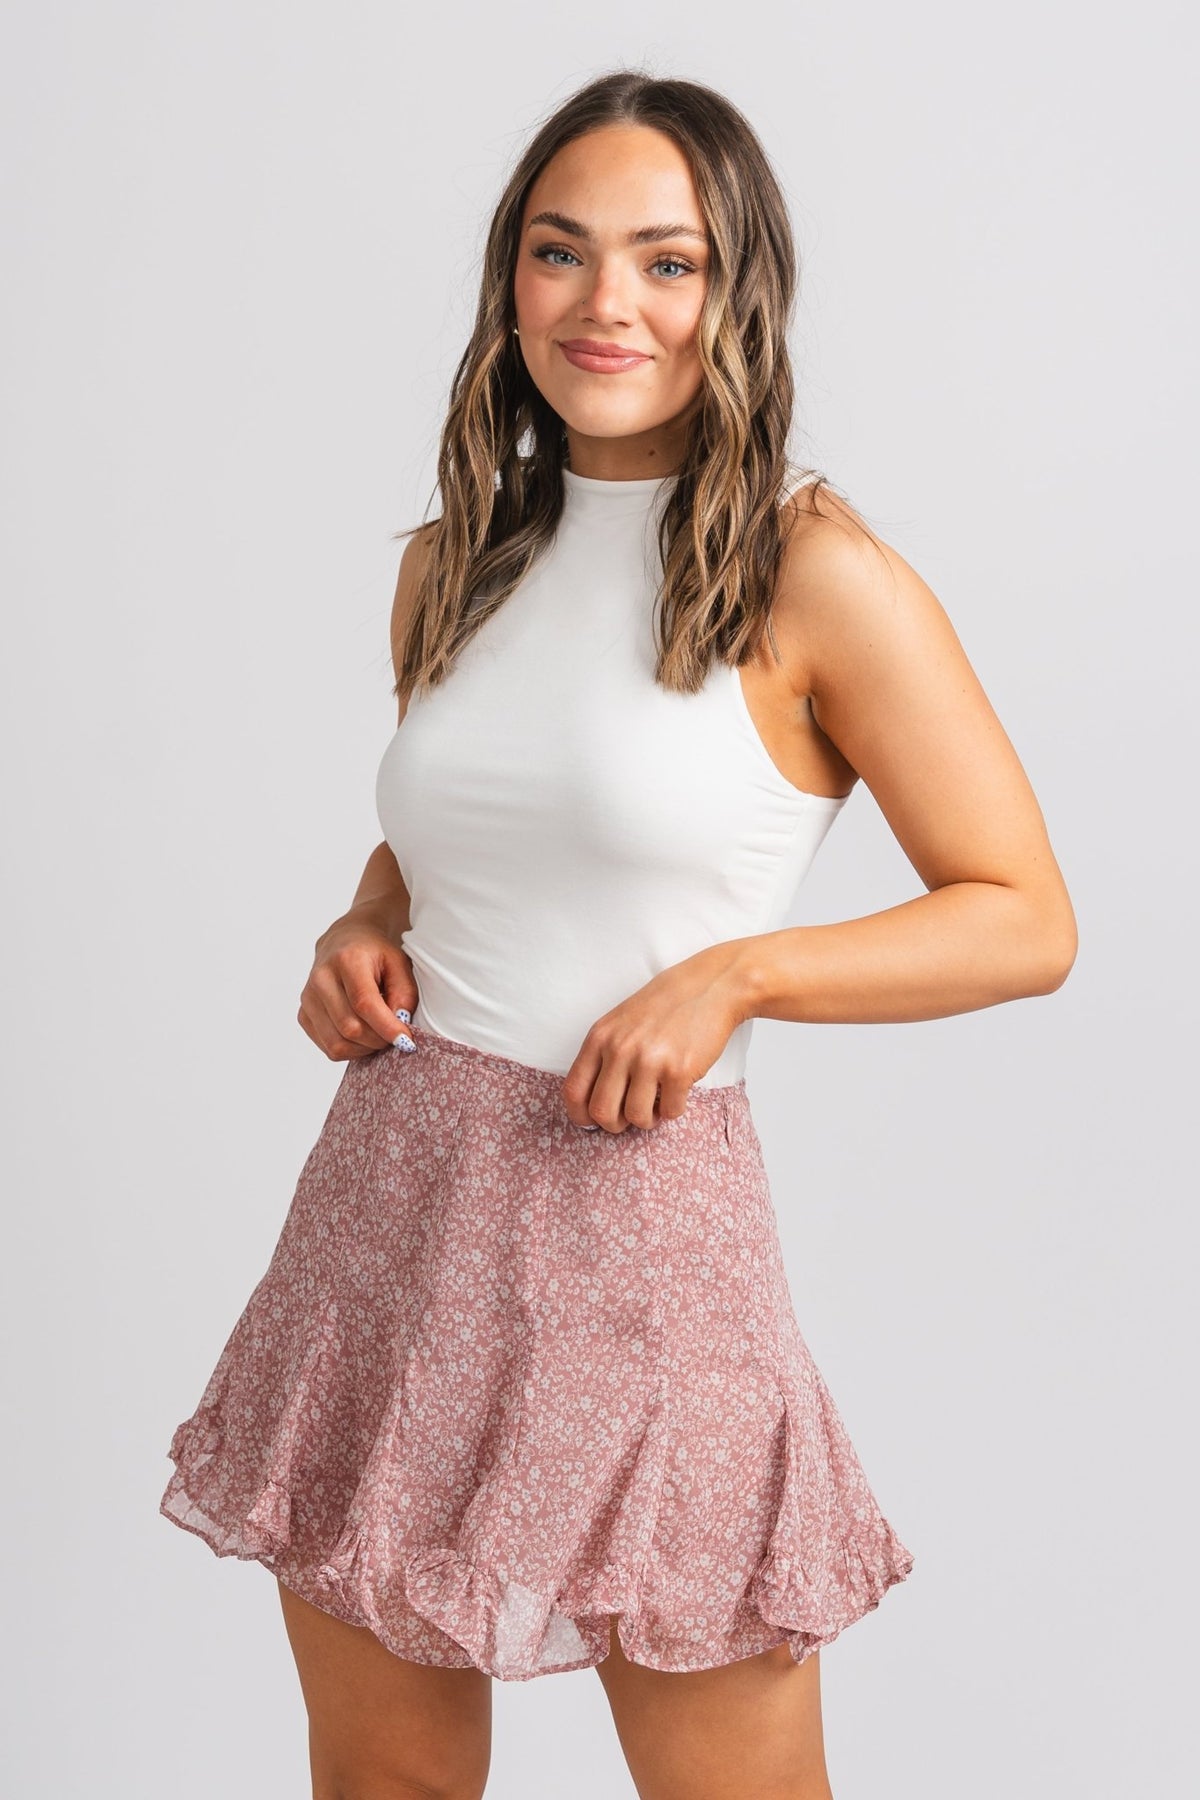 Floral ruffle skirt mauve/cream - Stylish Skirt - Cute Easter Outfits at Lush Fashion Lounge Boutique in Oklahoma